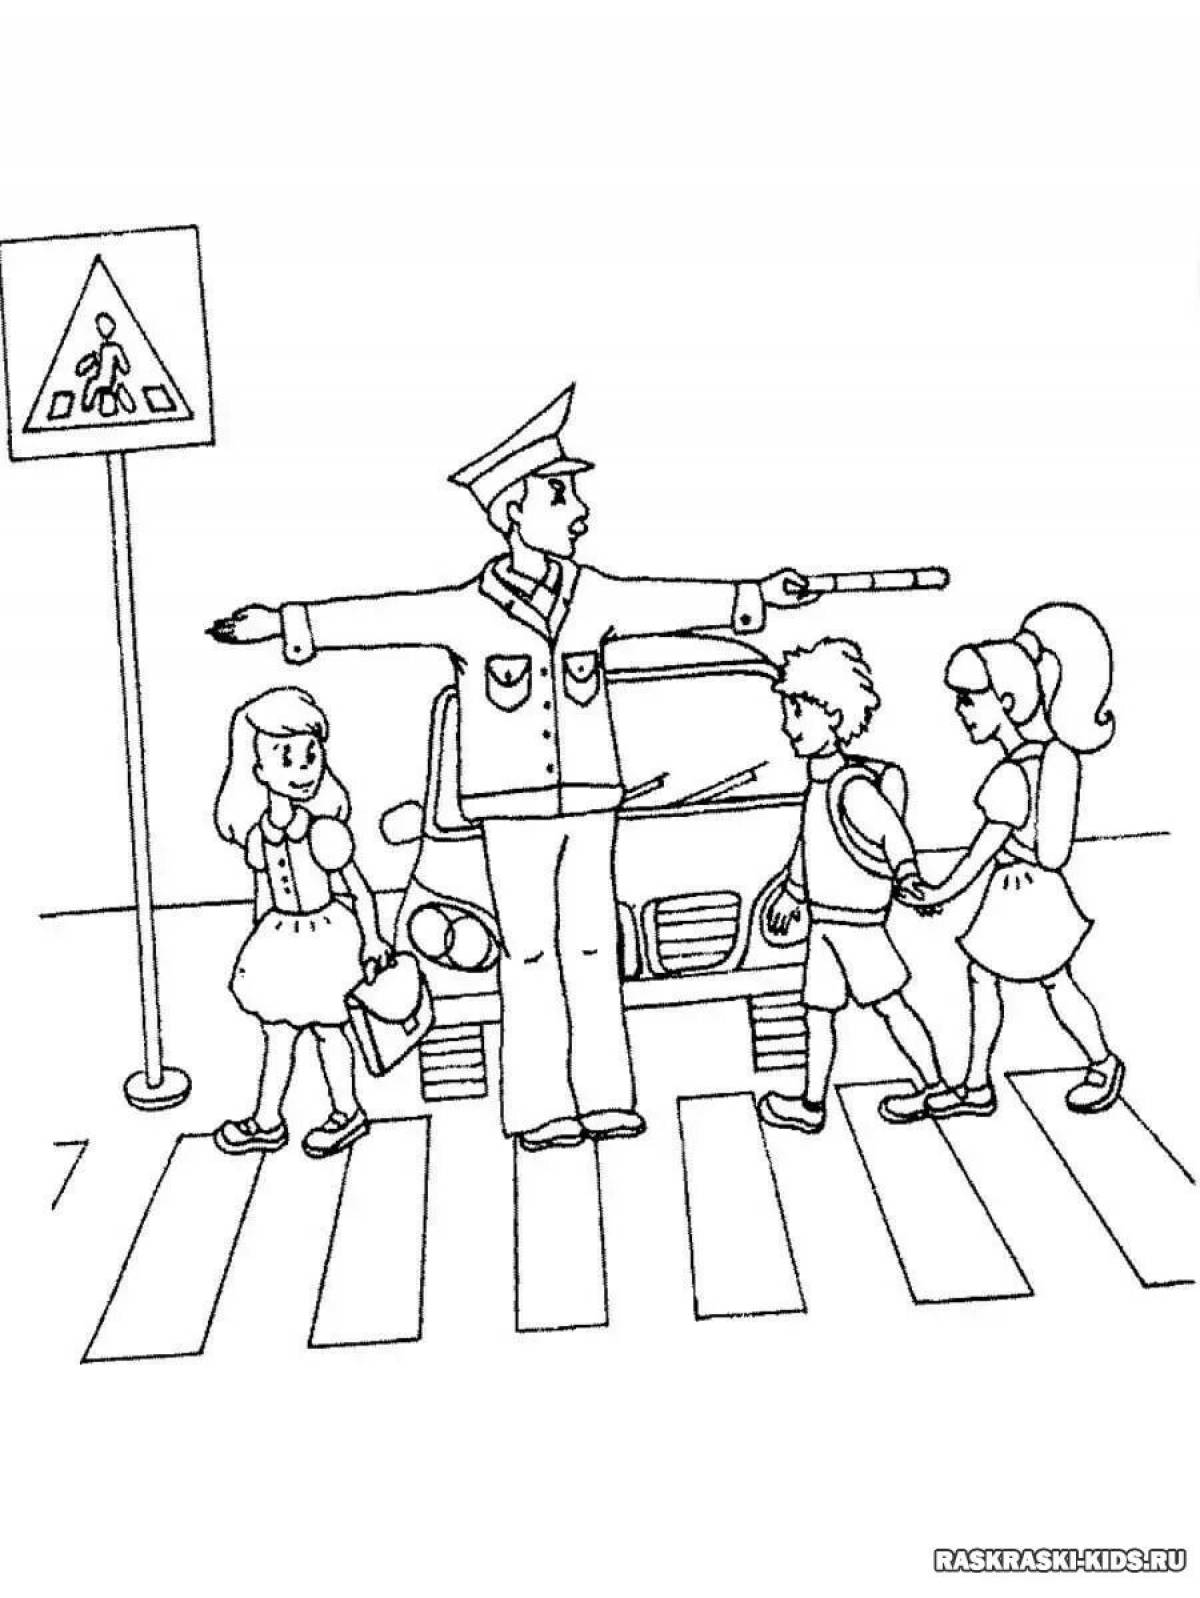 Cute traffic safety page for kids